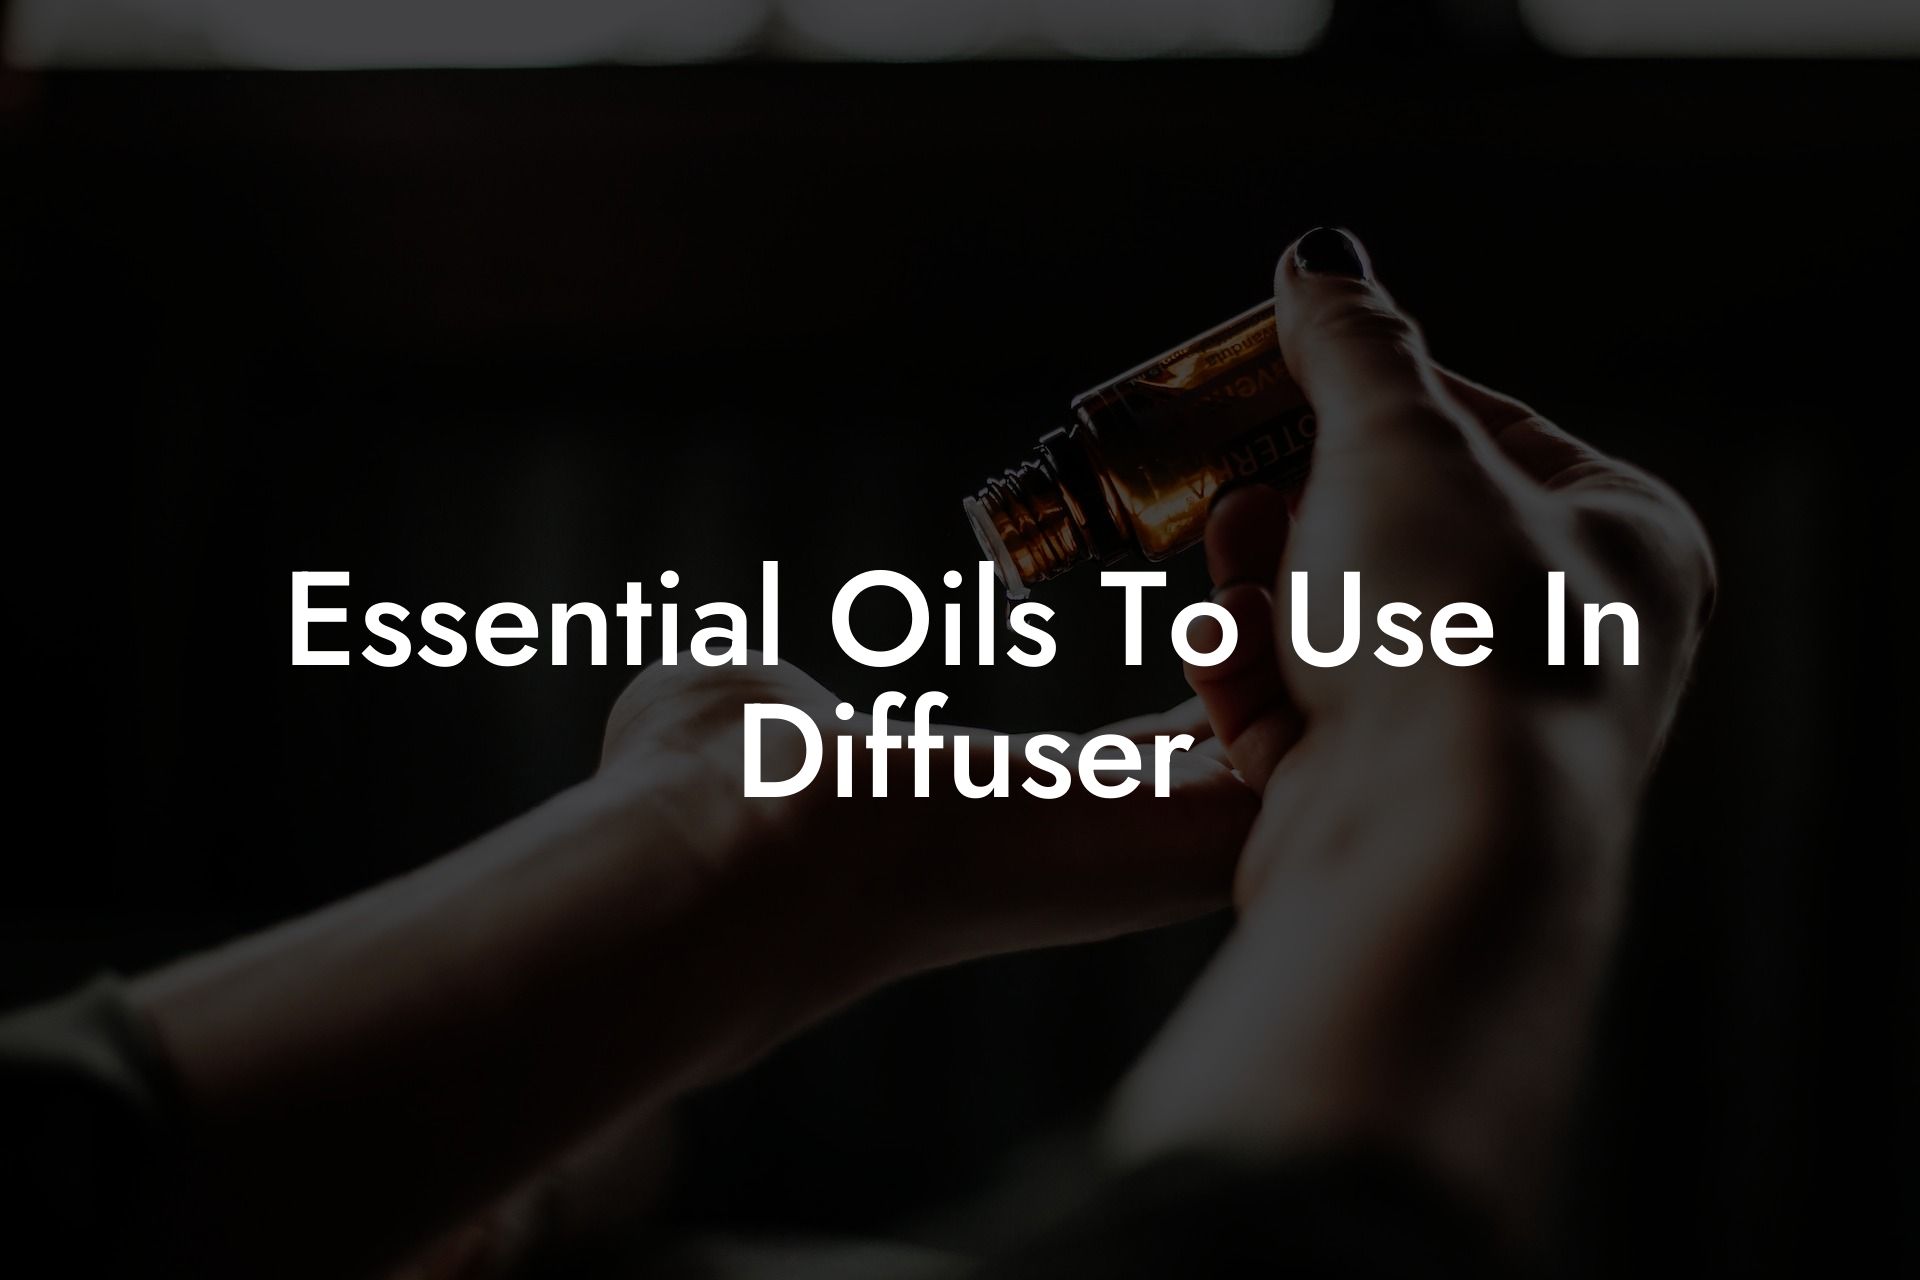 Essential Oils To Use In Diffuser